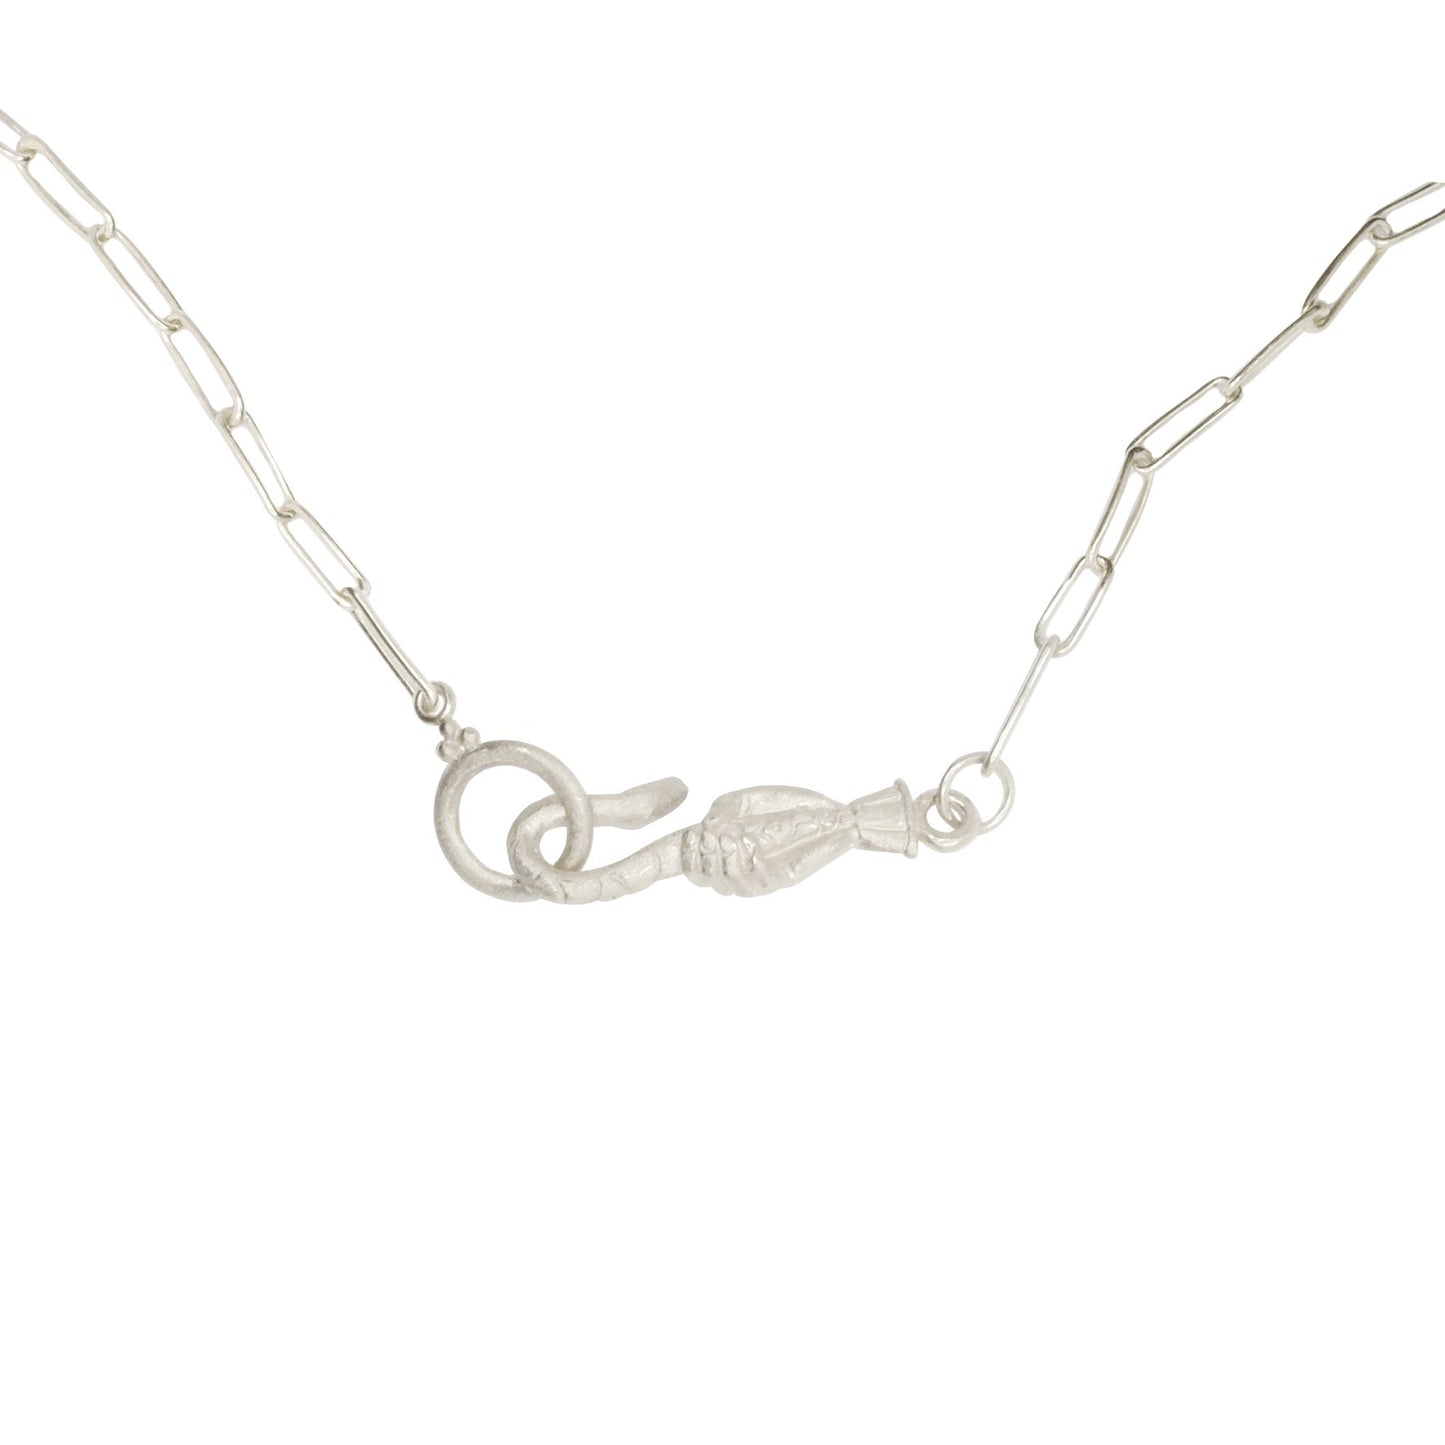 Serpent Hook Chain Necklace